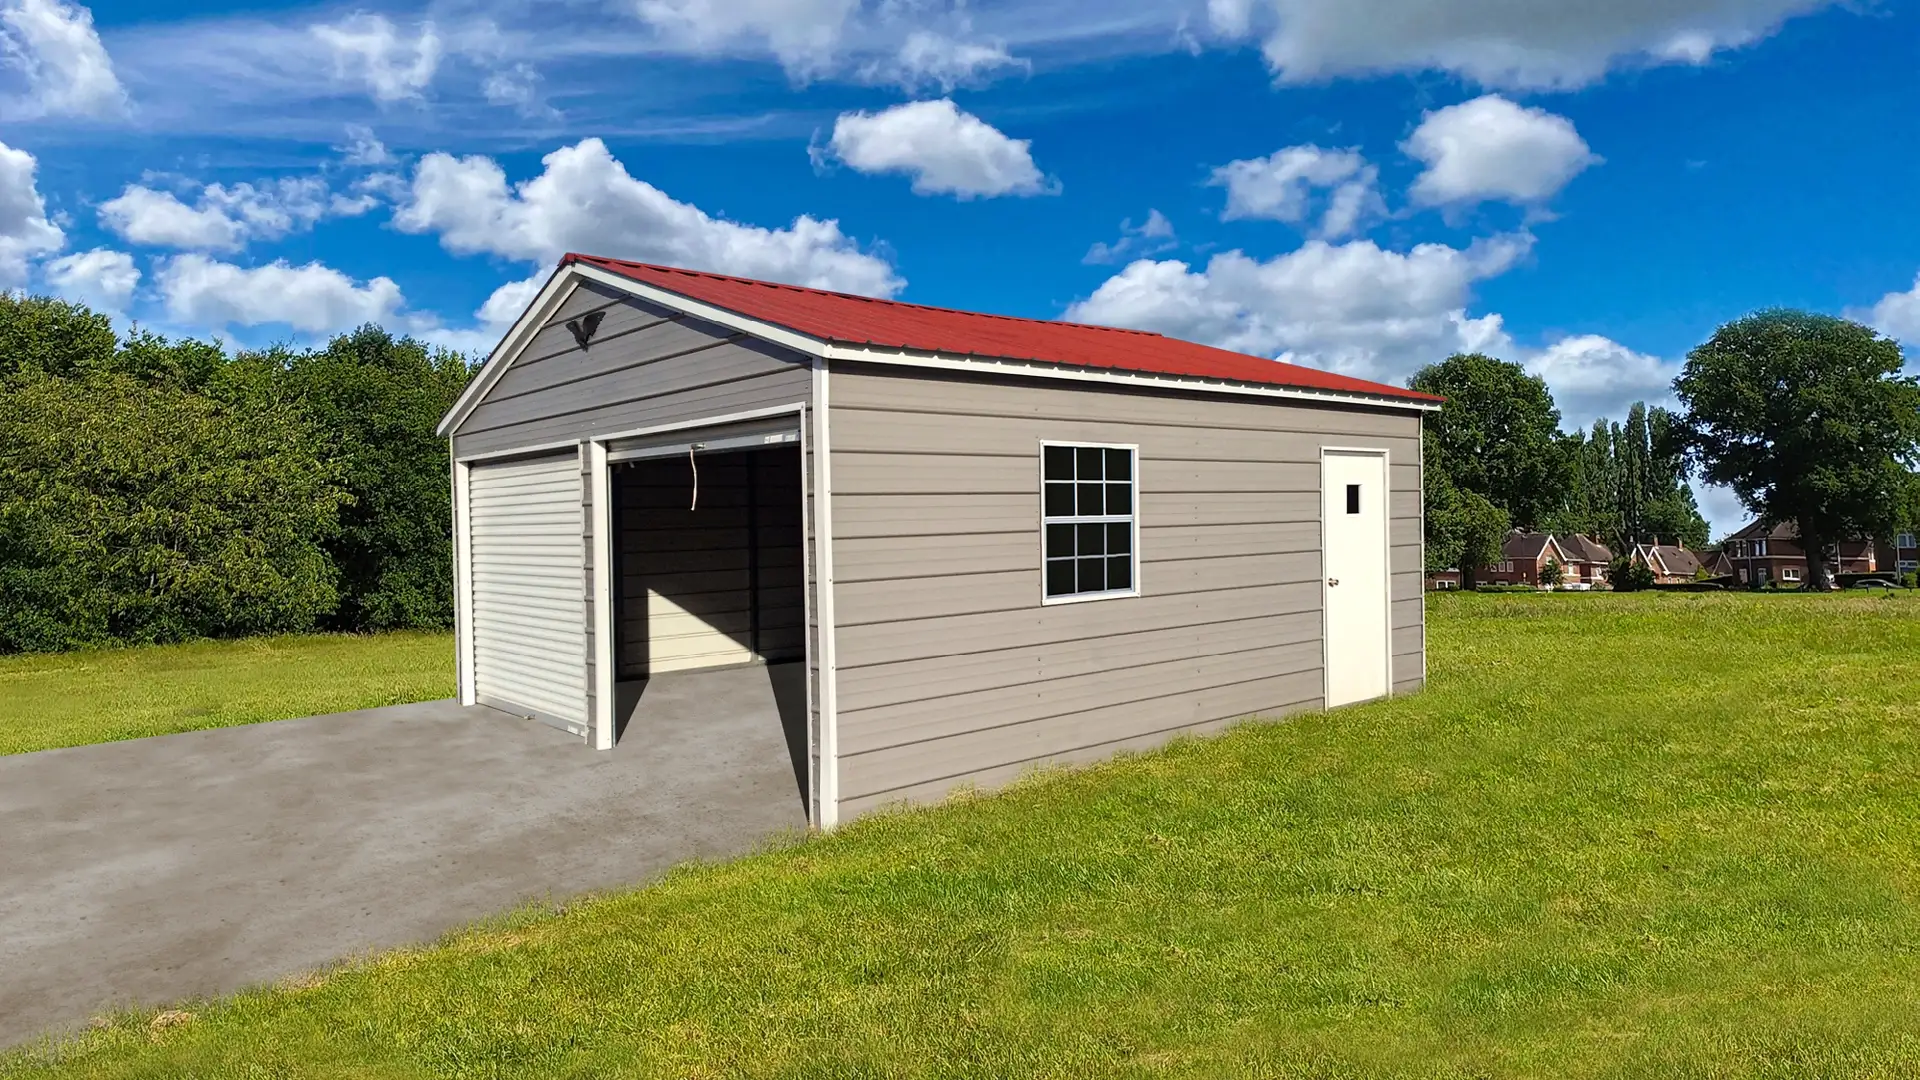 metal garage with a red roof and gray walls. The one door is open.